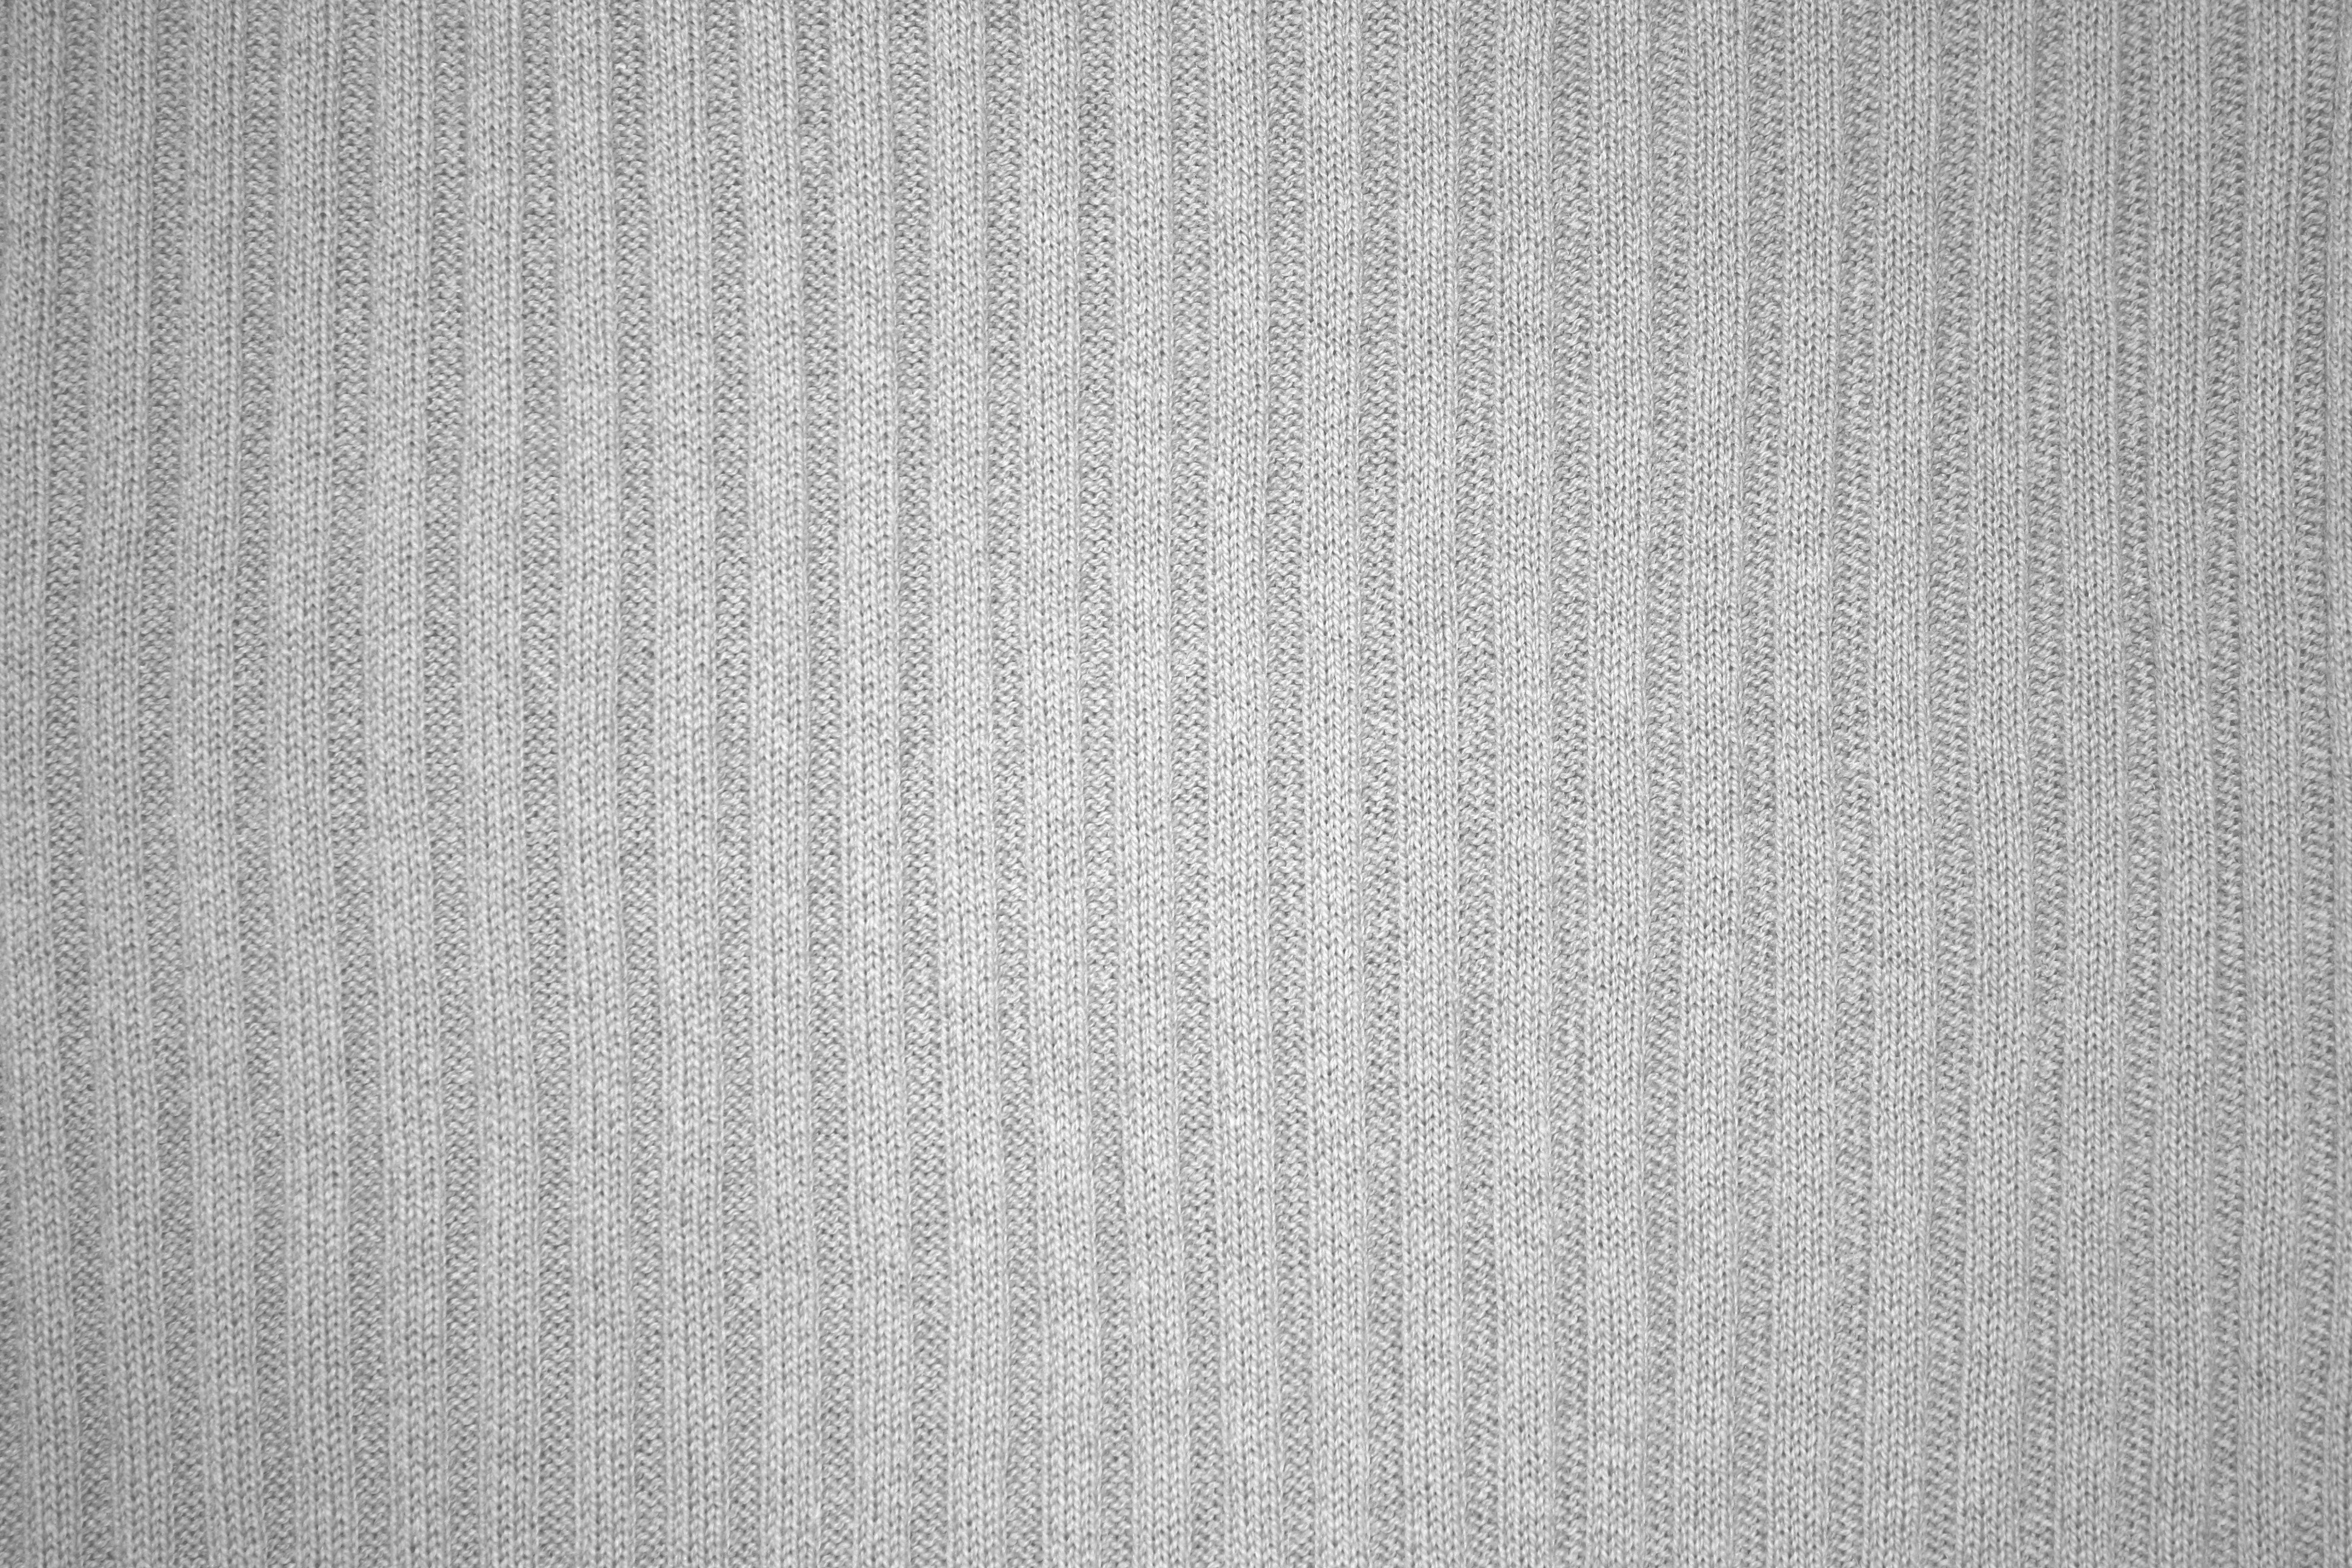 Gray Ribbed Knit Fabric Texture Picture, Free Photograph